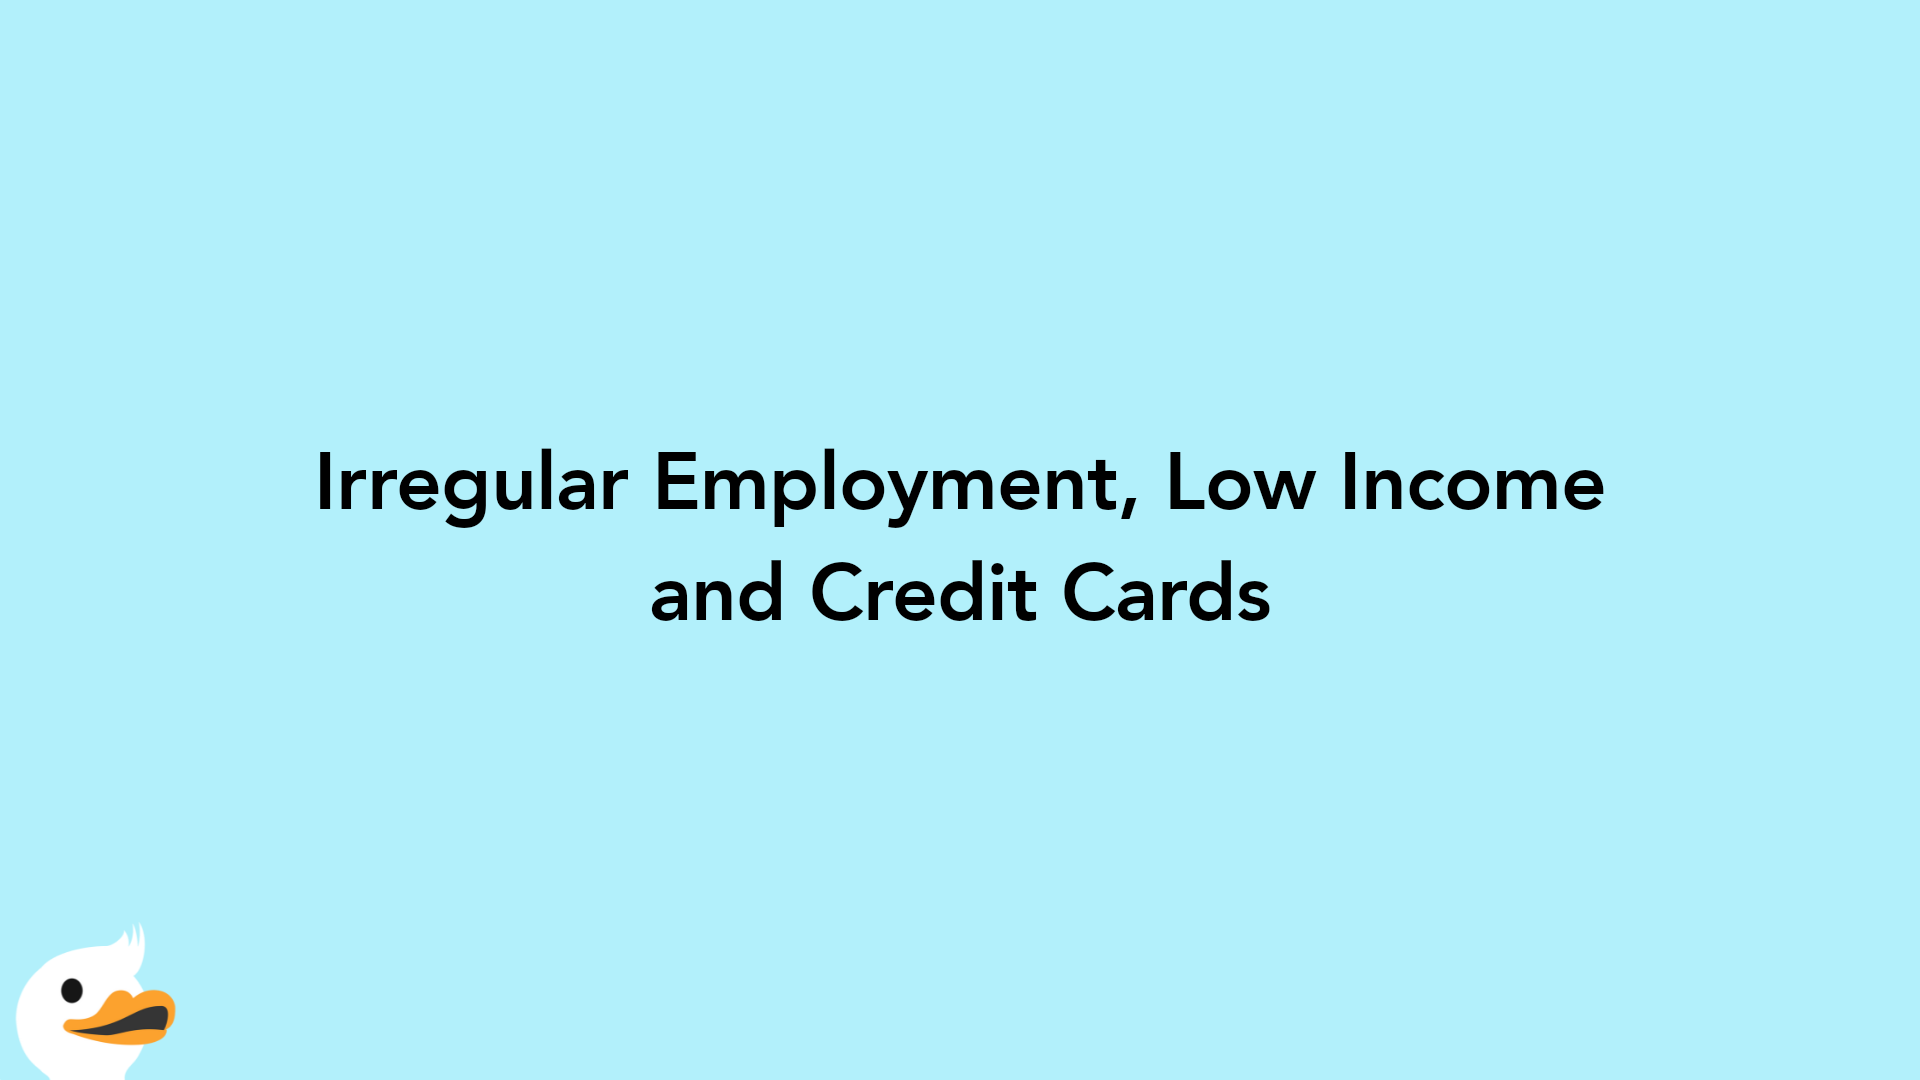 Irregular Employment, Low Income and Credit Cards